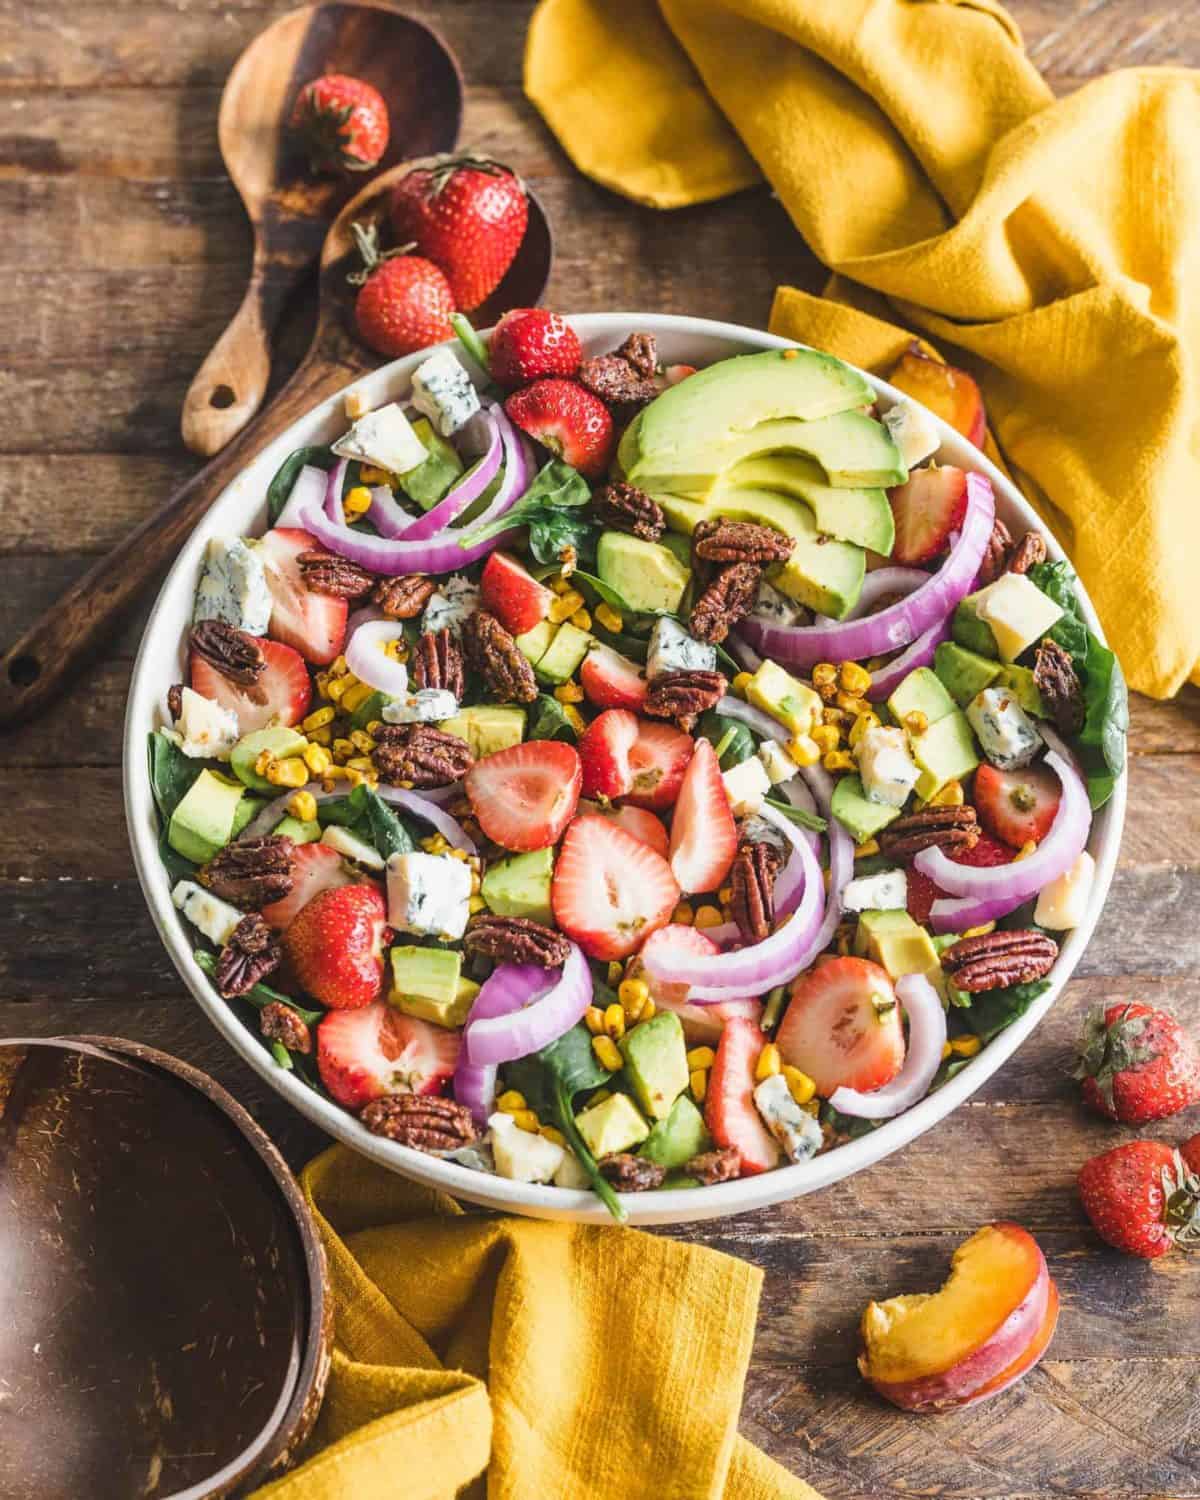 Strawberry Avocado Spinach Salad with Candied Pecans